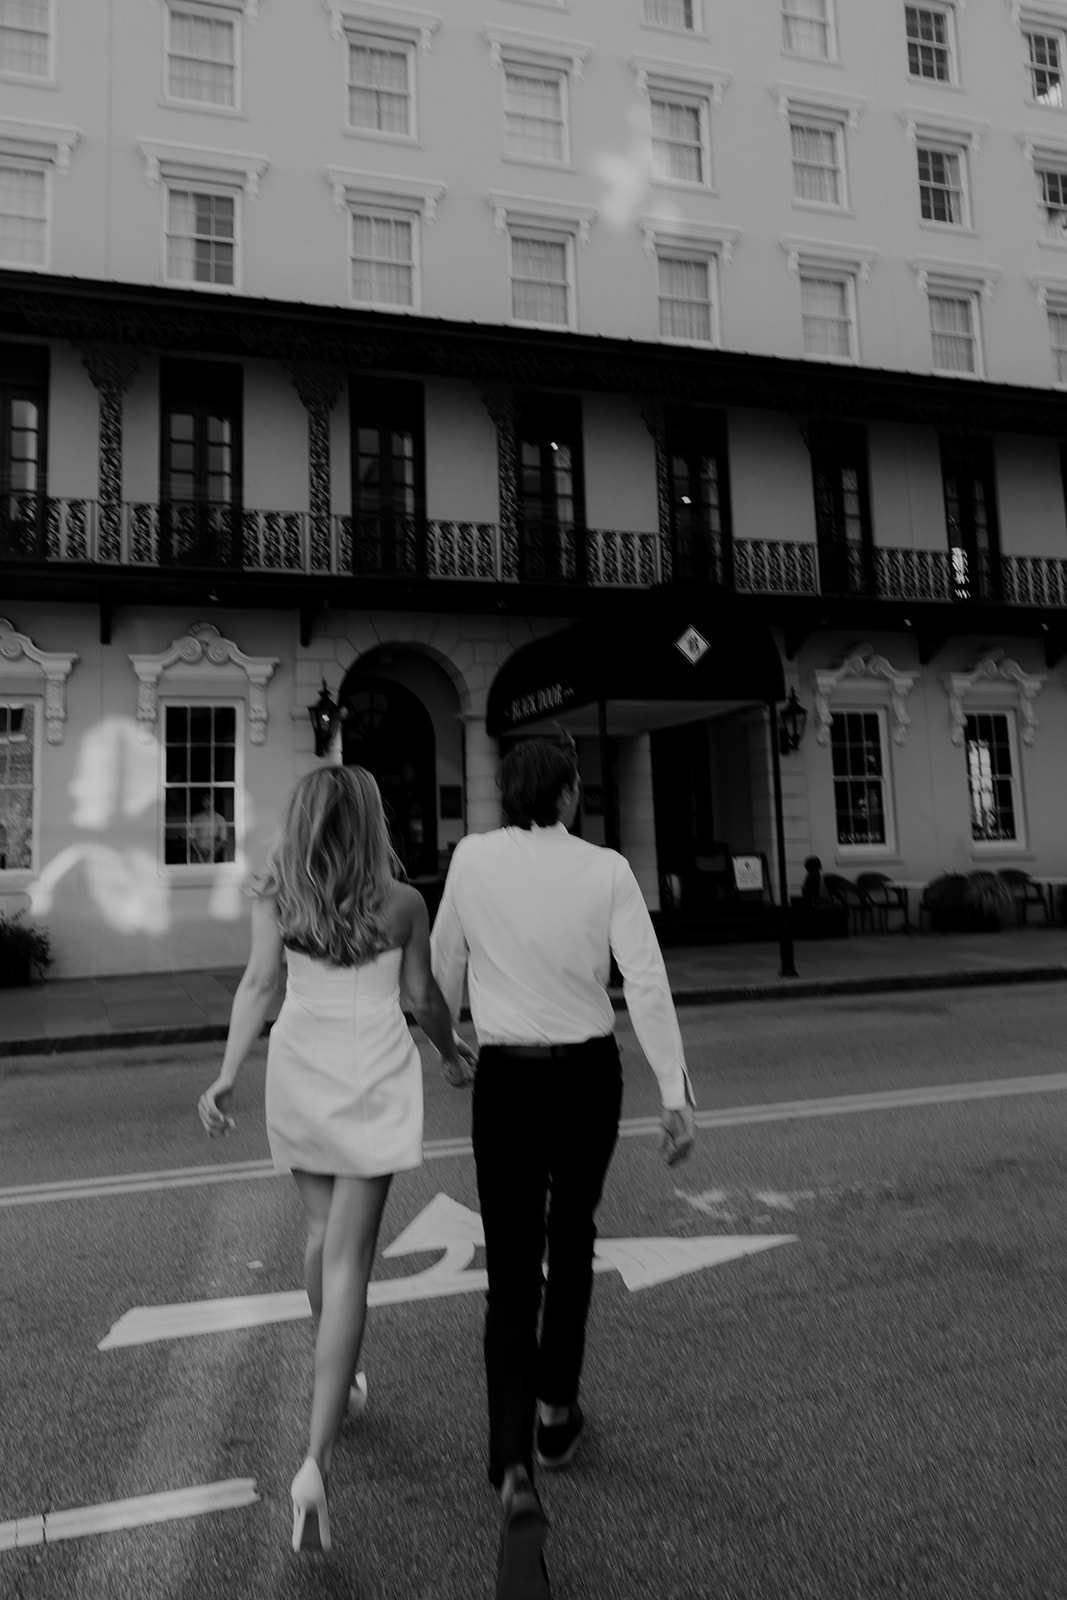 Woman and man walking across street for Charleston Engagement Photos. Millshouse in background